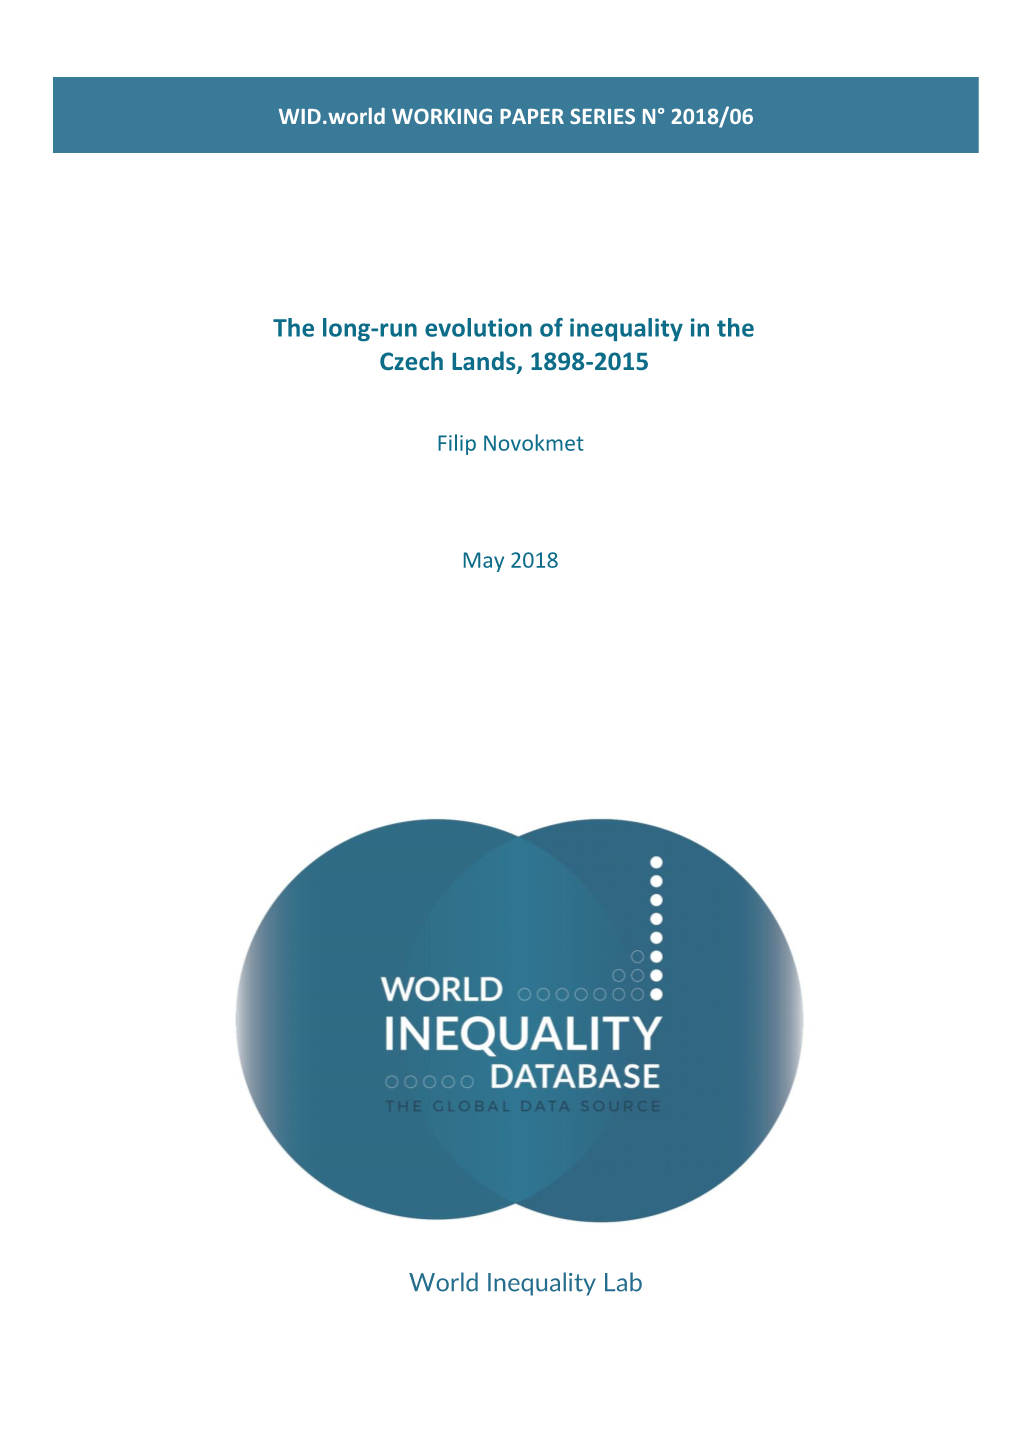 The Long-Run Evolution of Inequality in the Czech Lands, 1898-2015